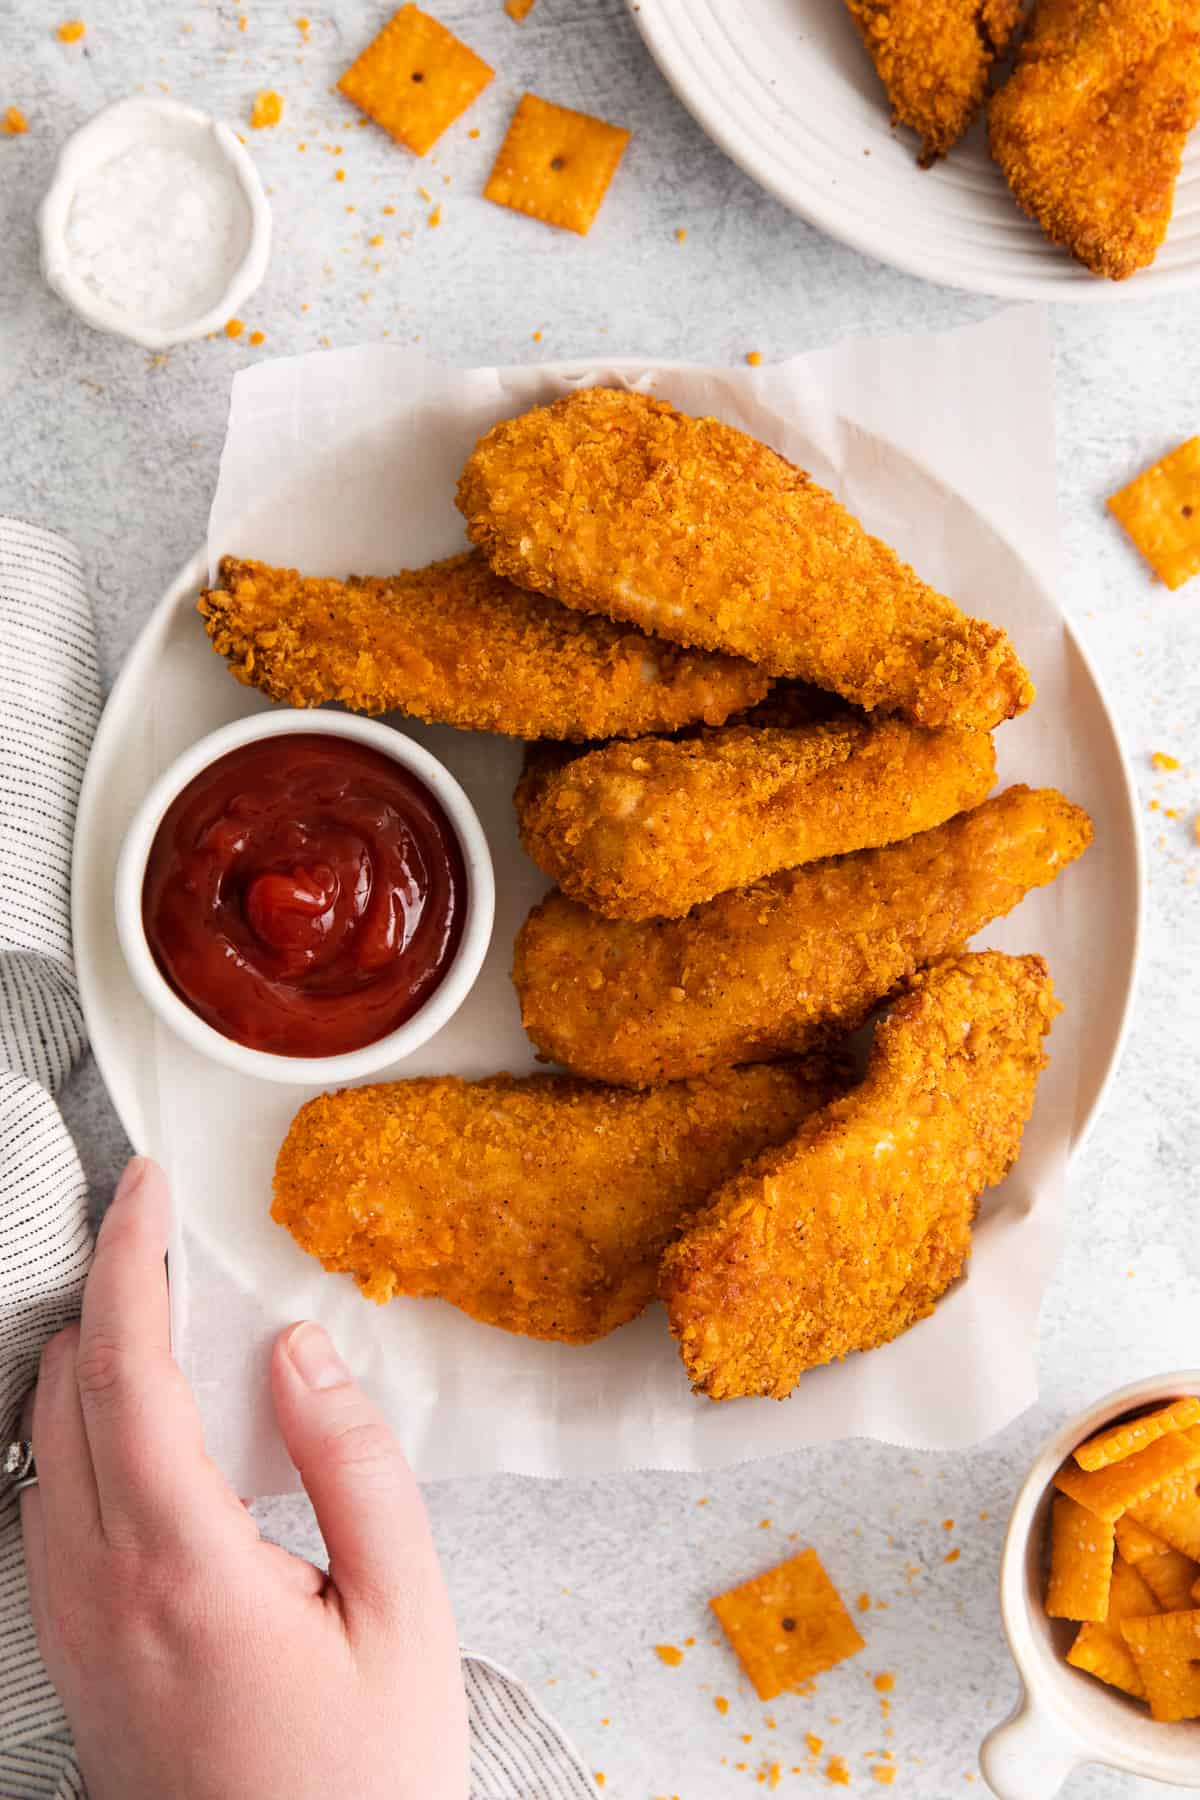 Chicken fingers on a plate with ketchup.